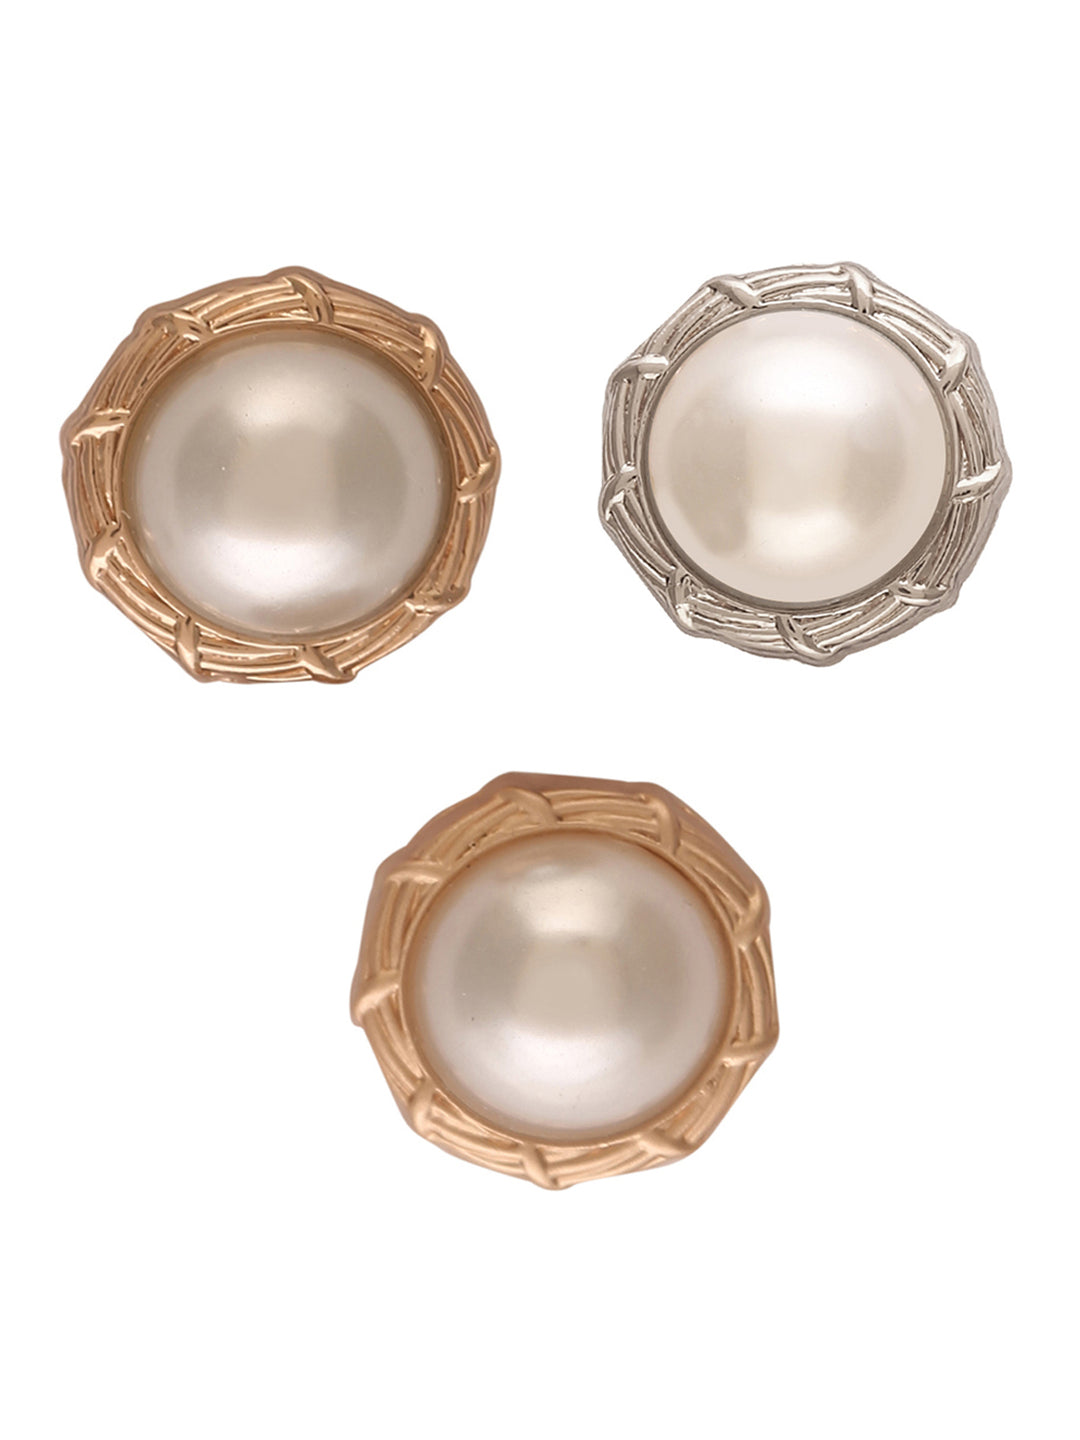 Super Classy Round Shape Pearl Buttons